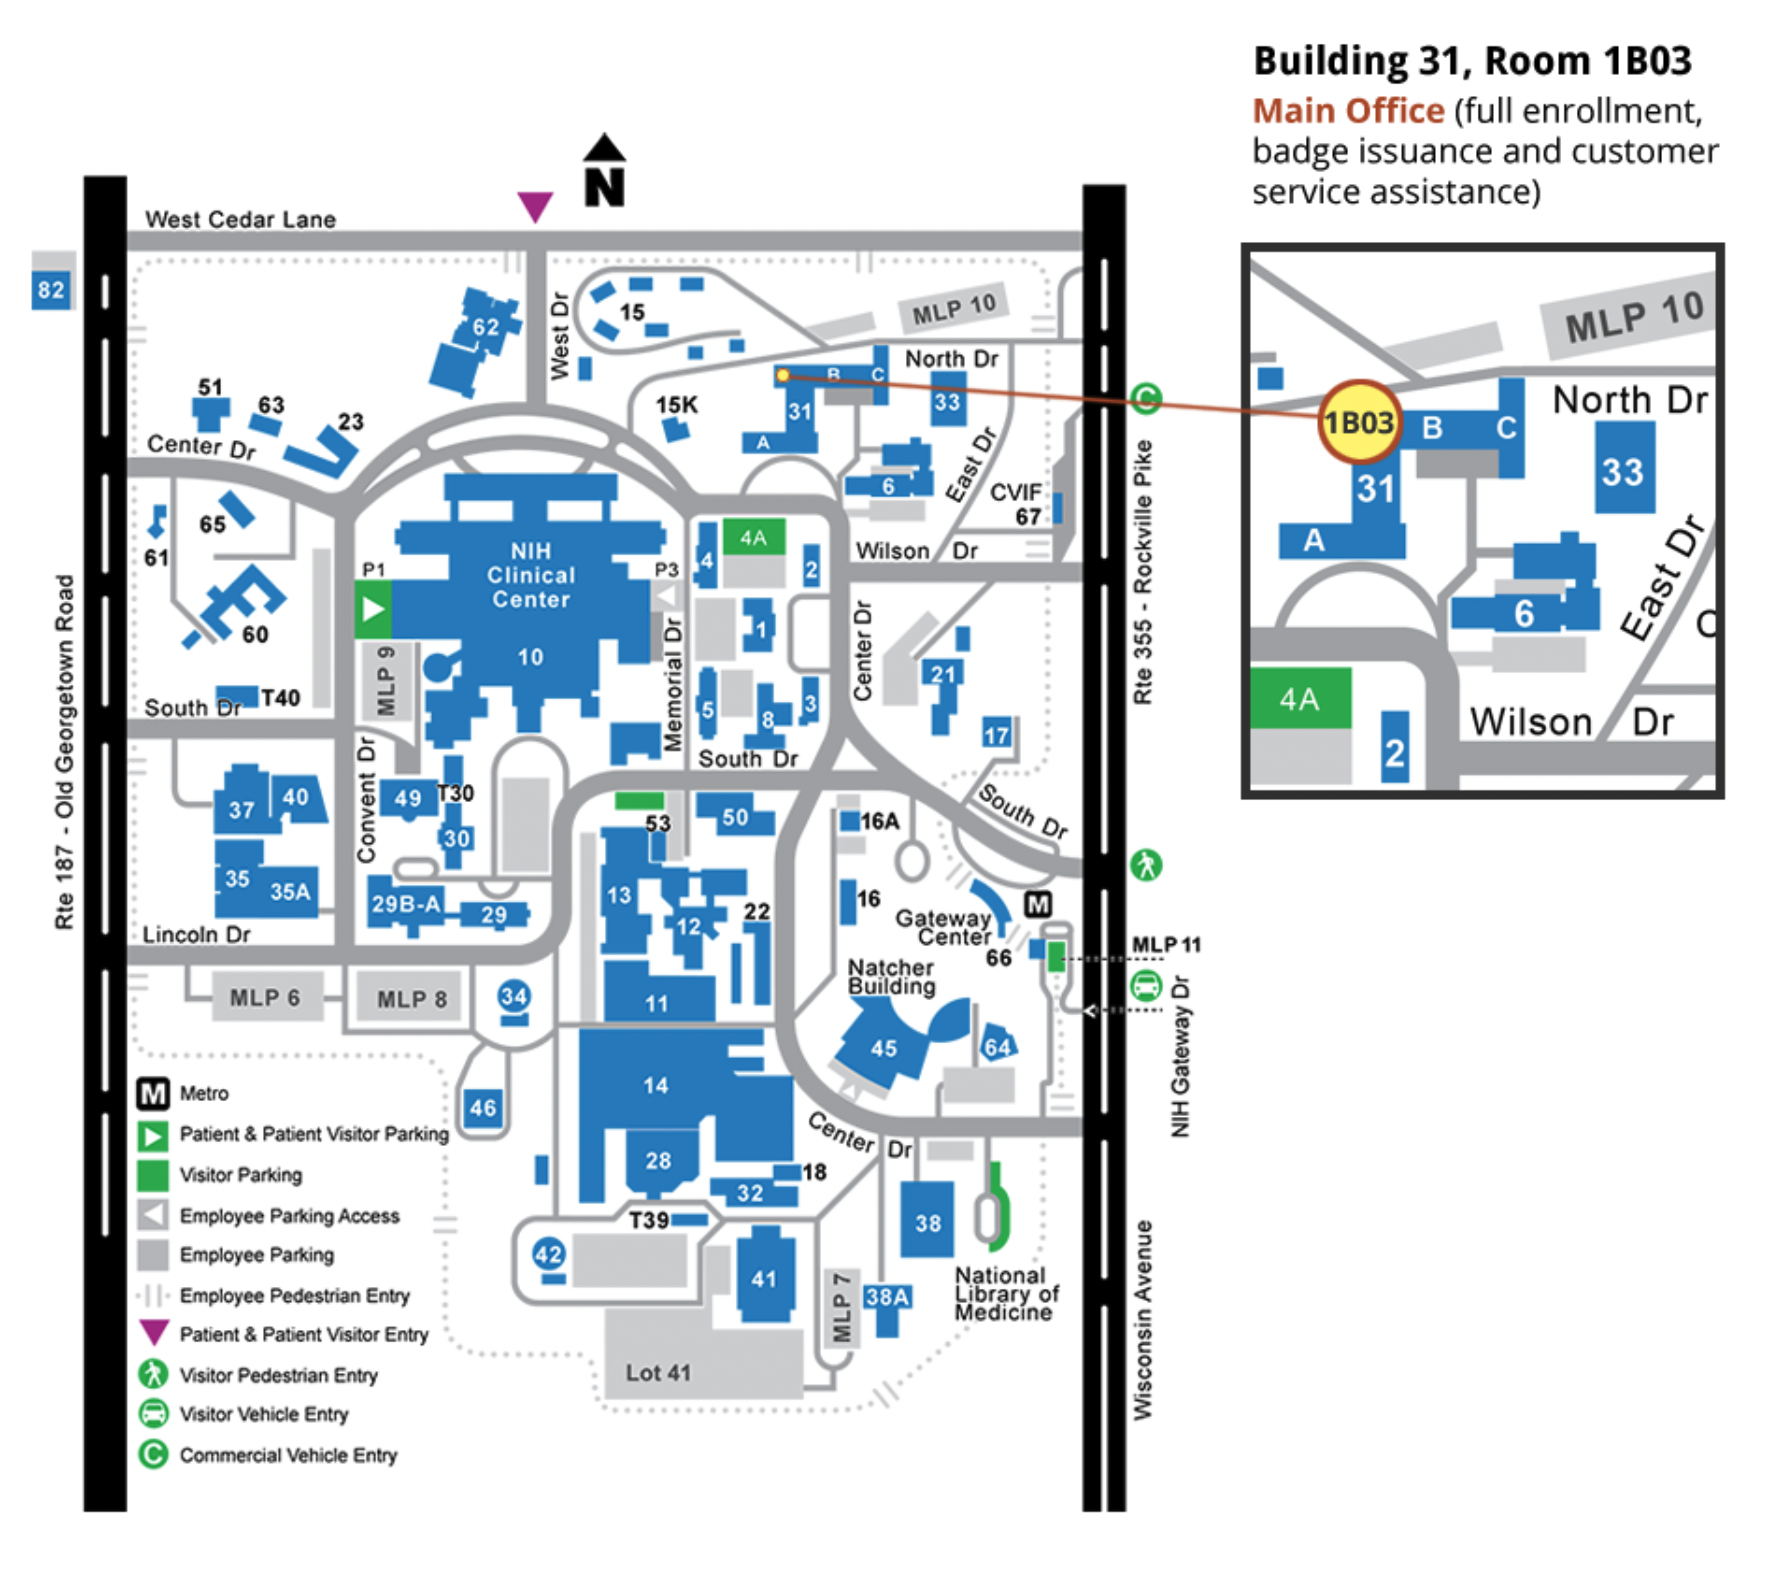 Location Map of Building 31, Room 1B03